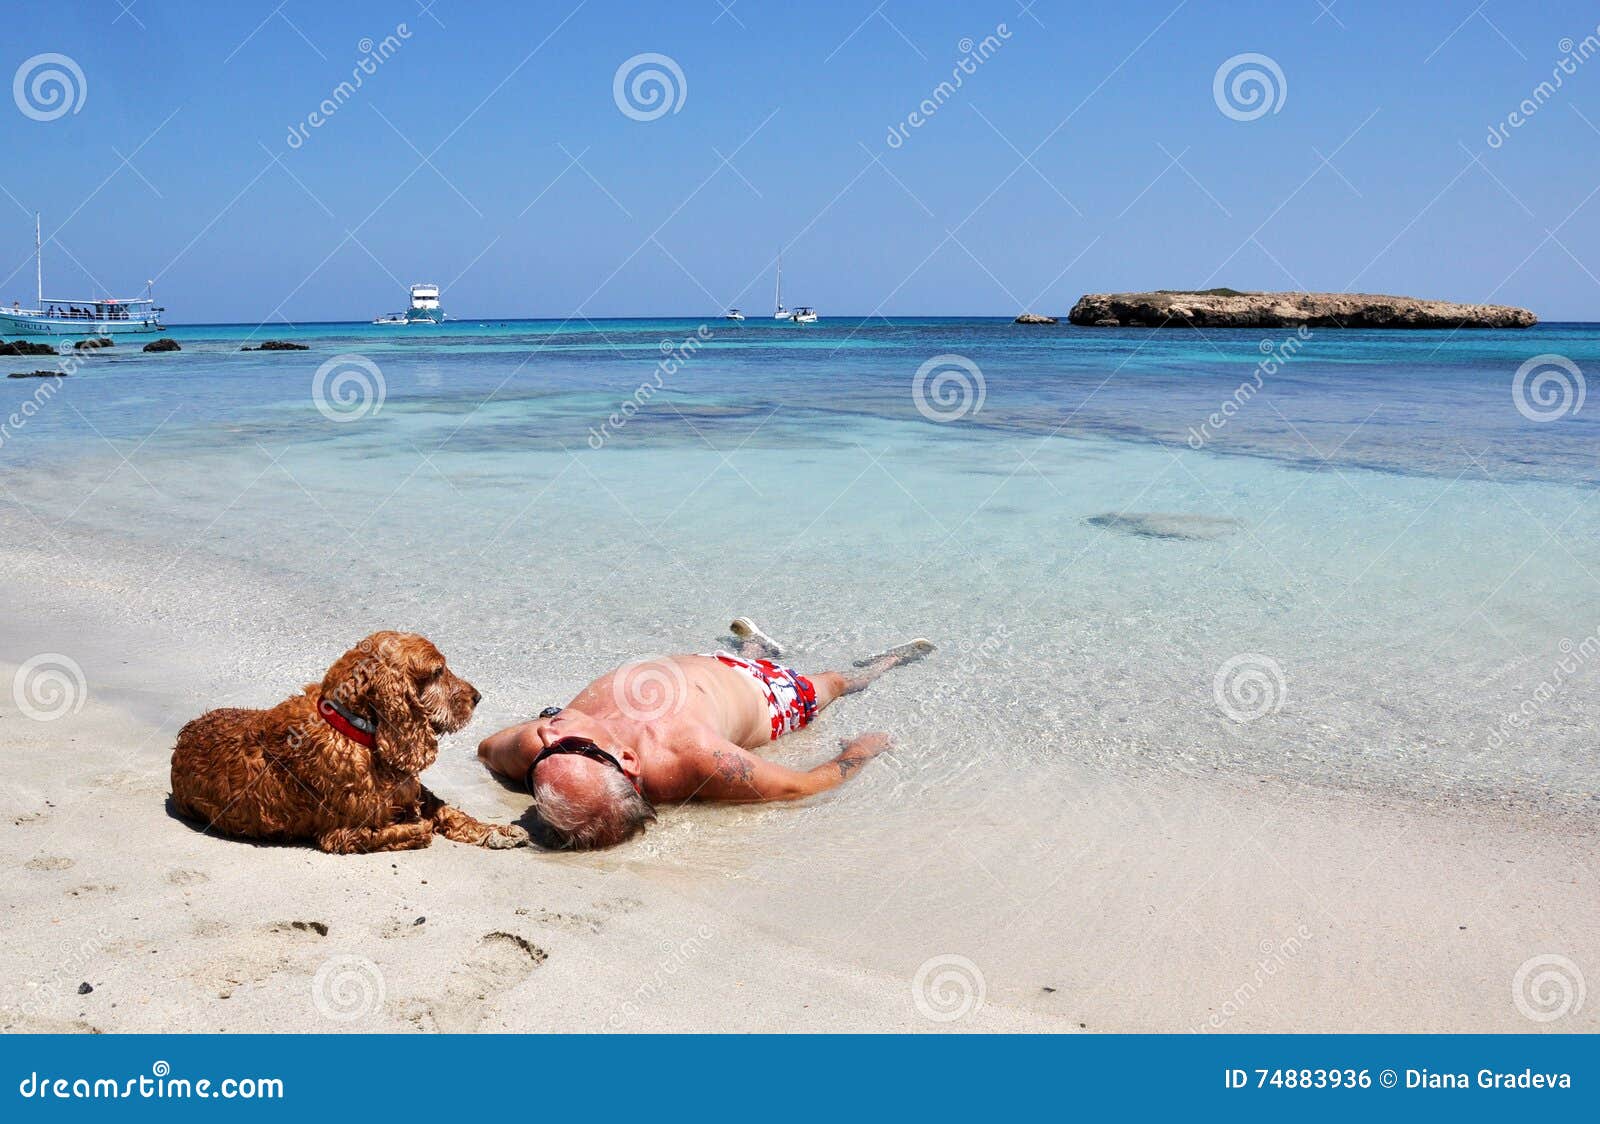 adult dogs with relaxing vacation